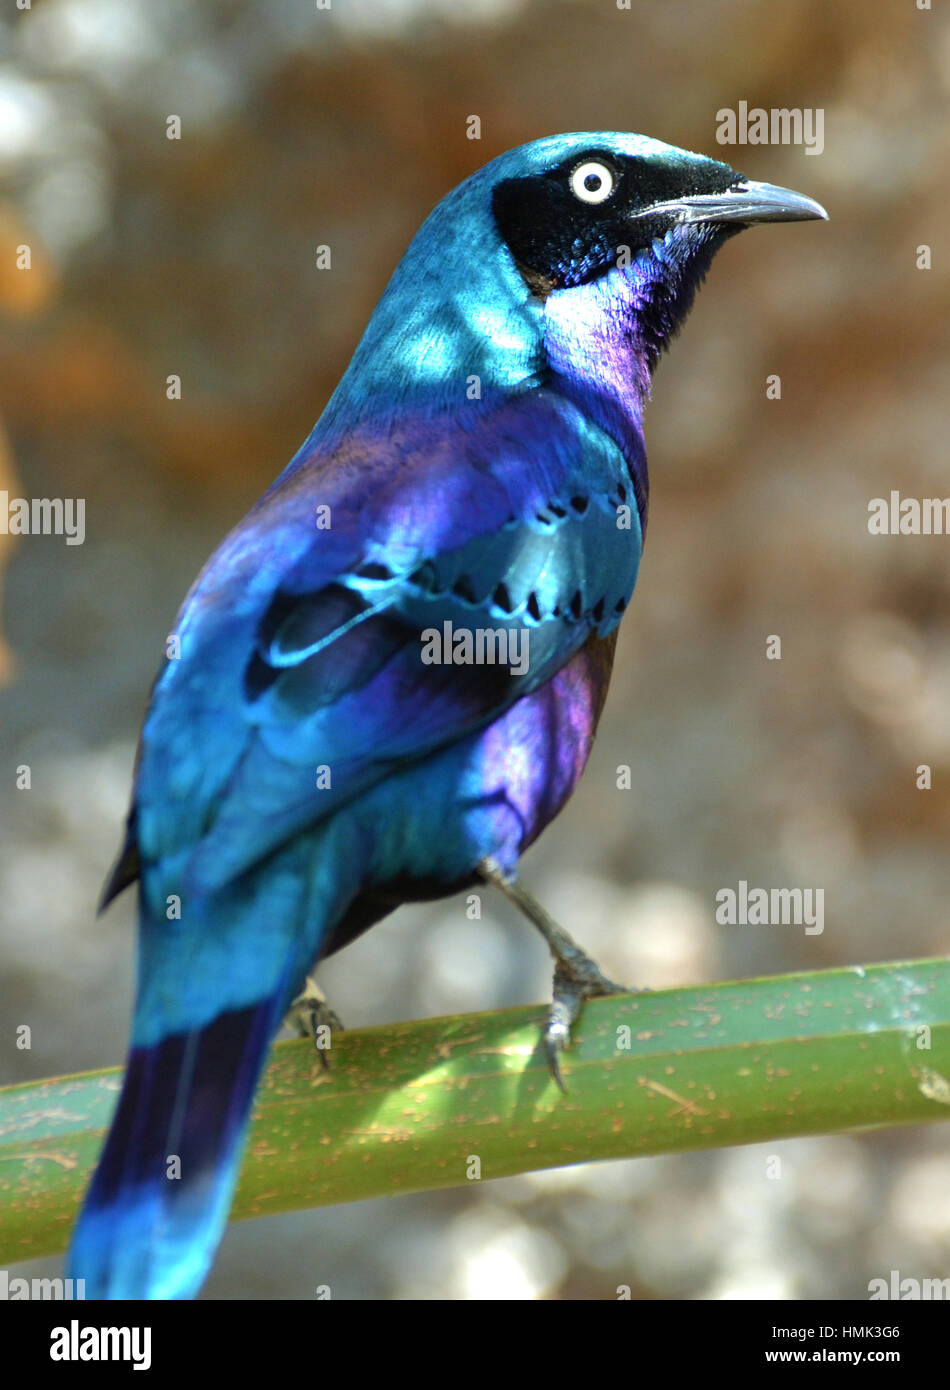 The Superb Starling (Lamprotornis) is an iridescent blue bird which occurs in Africa. Stock Photo